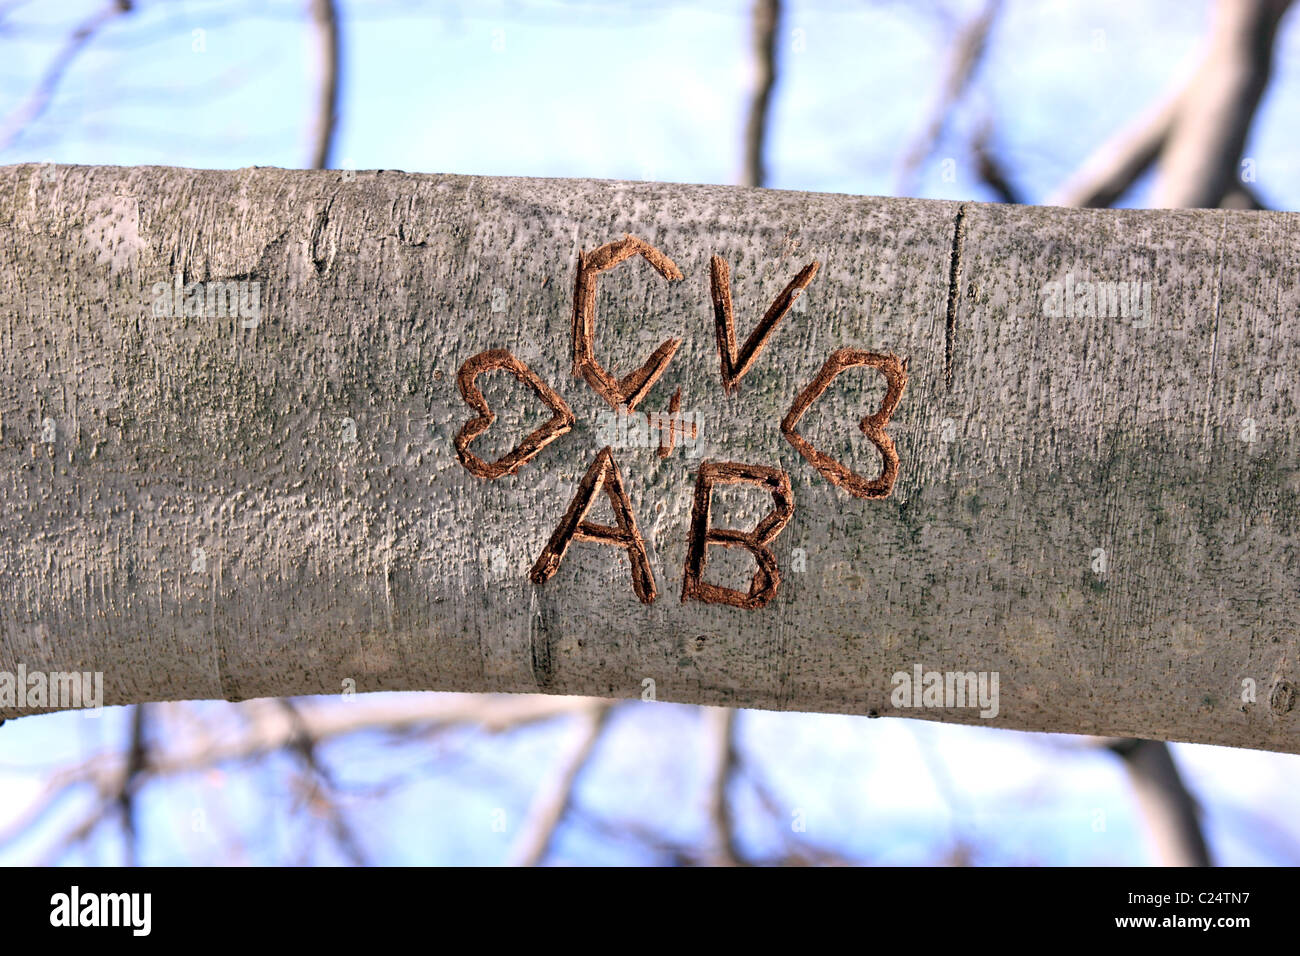 Initials carved in tree branch, Long Island NY Stock Photo